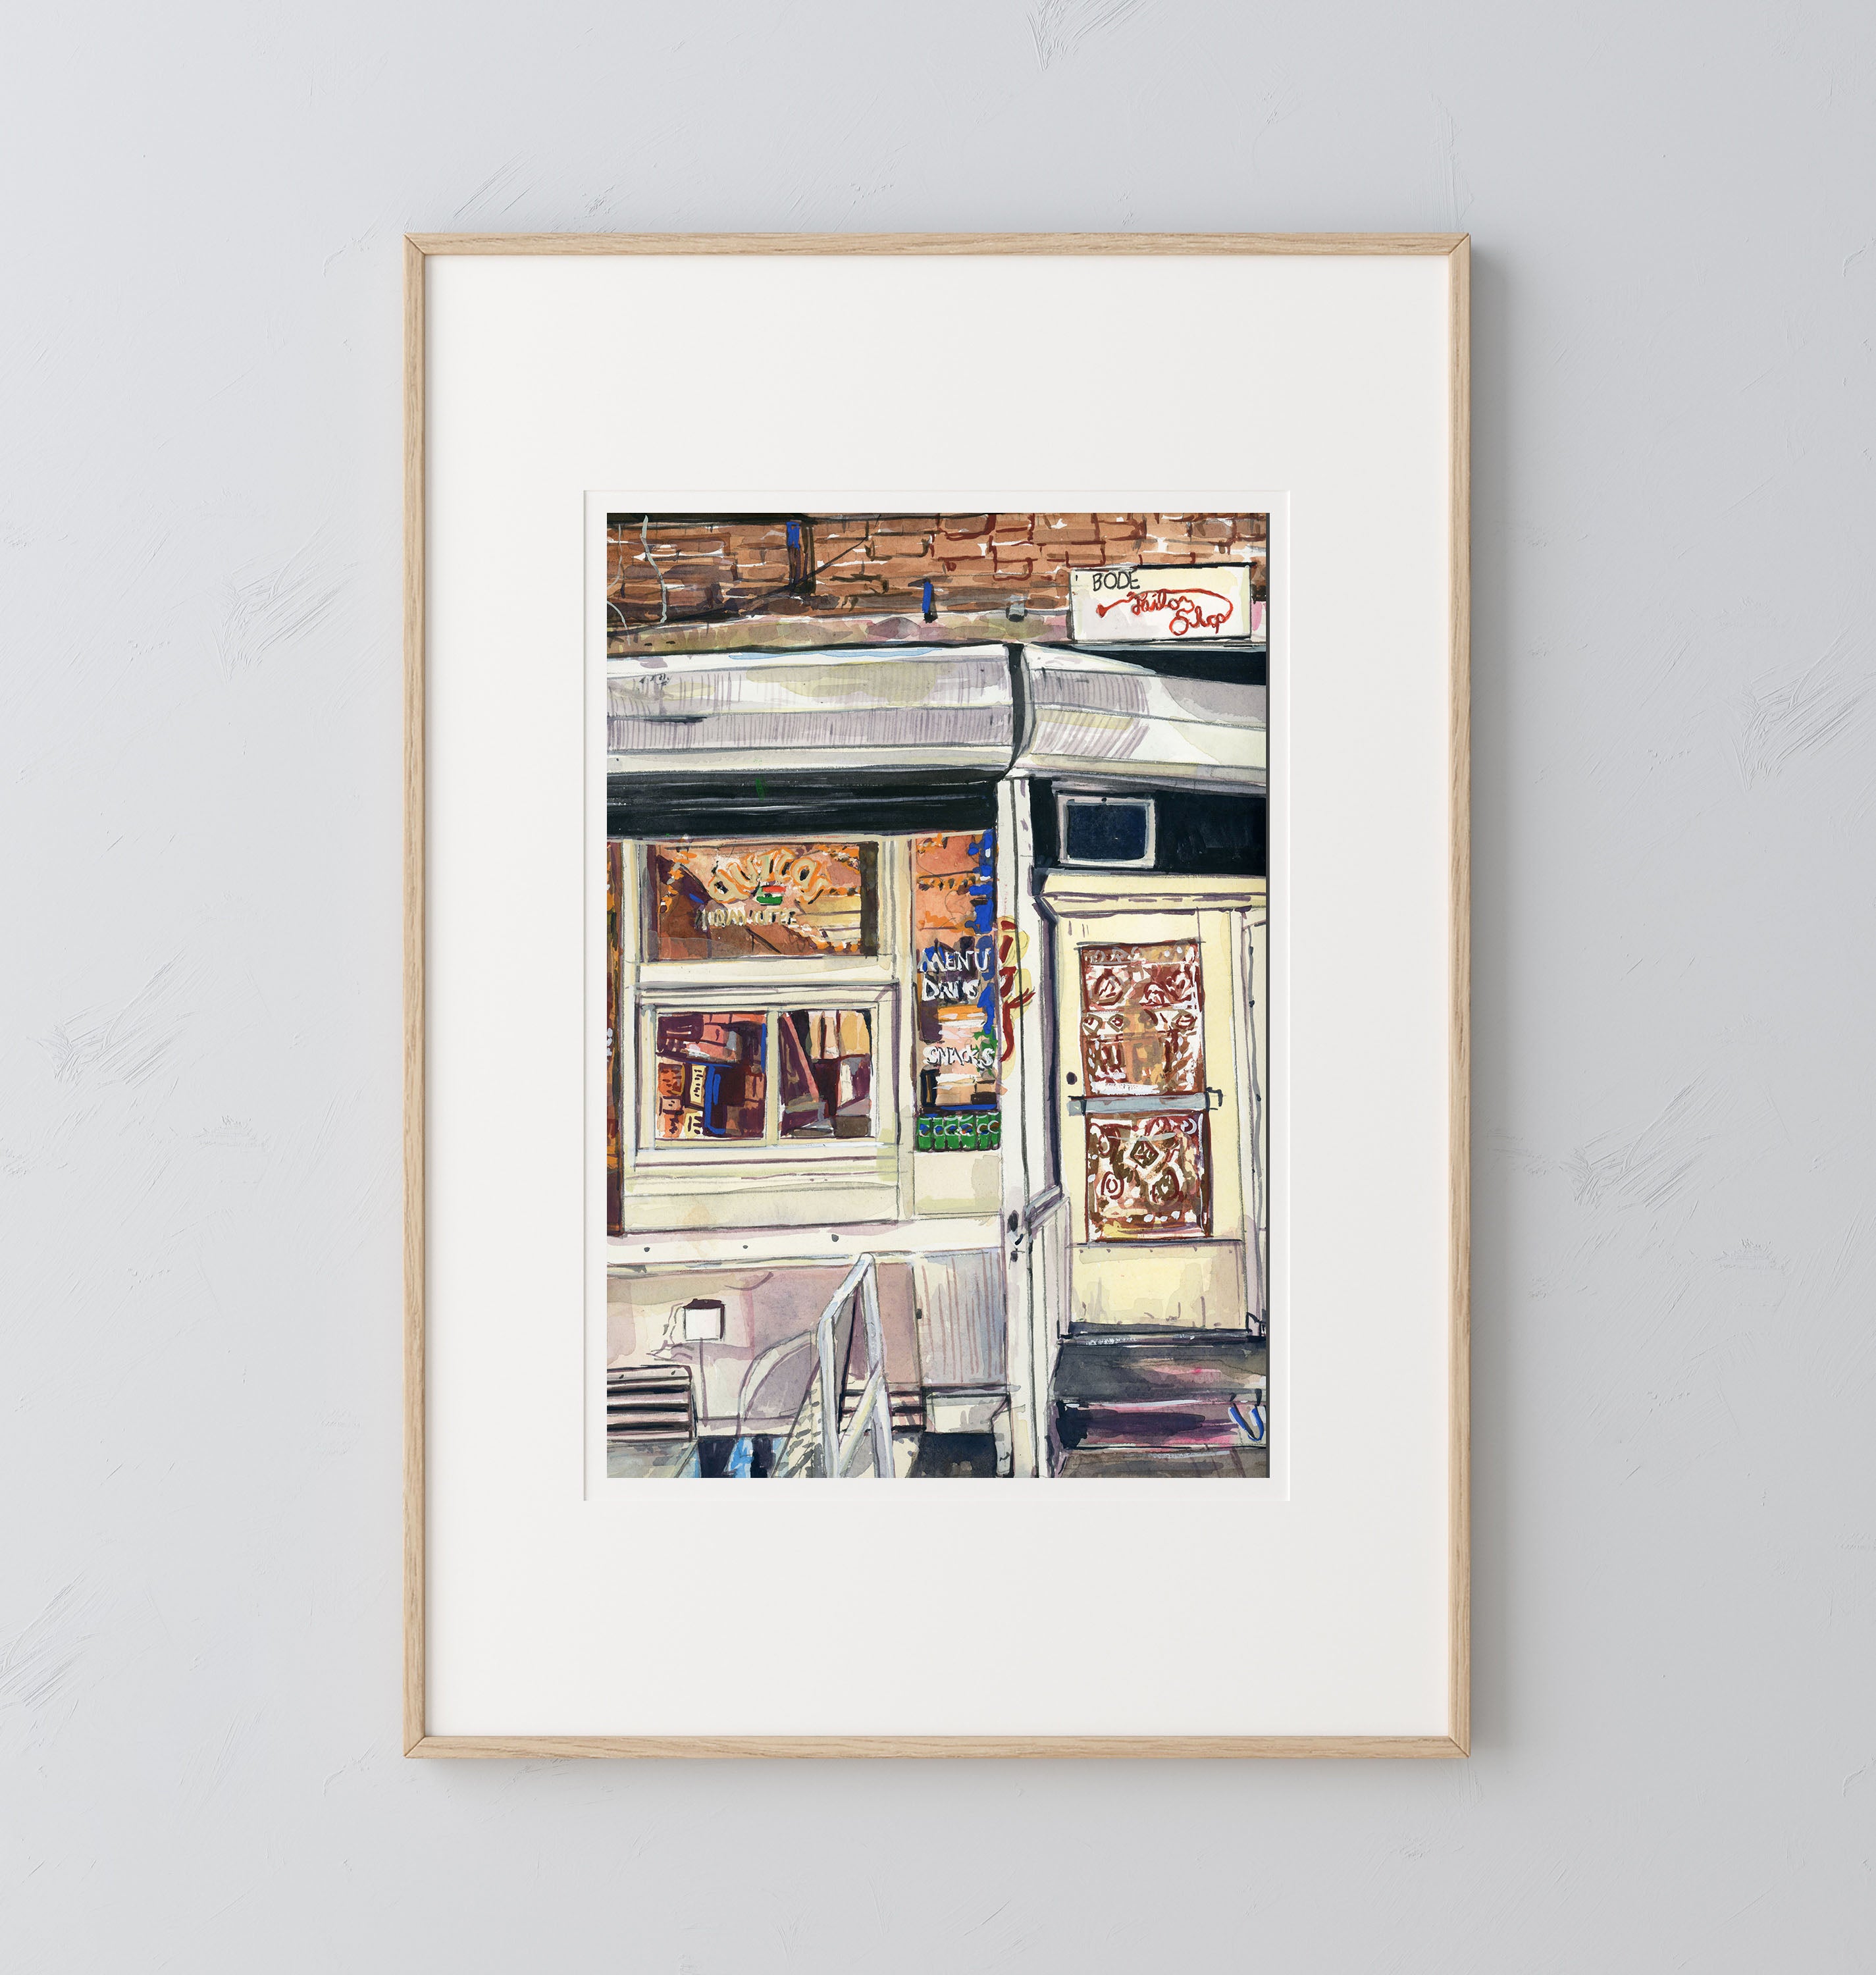 Bode Tailor Shop original painting by Medjool Studio. Original gouache painting captivating the essence of Bode Tailor Shop, nestled within the vibrant streets of SoHo, New York City, using contrasting neutral and vibrant colours.